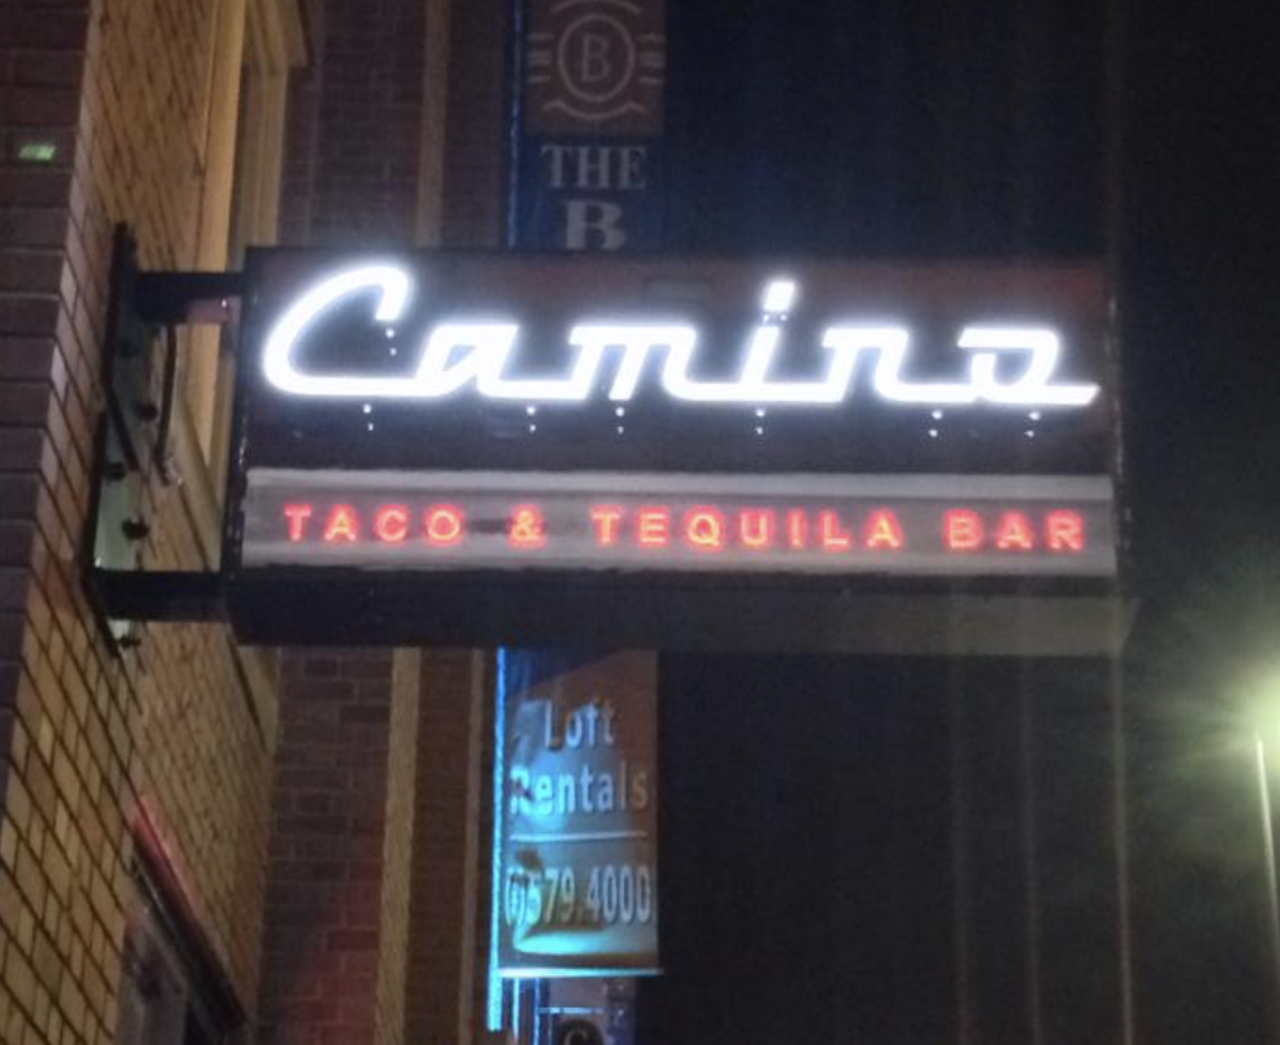  Camino Taco and Tequila Bar
1300 West Ninth St., Cleveland
This contemporary taco and tequila bar, that opened in 2014, fits right into the Warehouse District neighborhood it calls home. This locally owned spot keeps things simple with a streamlined menu that focuses on snacks, small plates and tacos. A great meal can be made just from the starters, paired with a cold Mexican beer or margarita.